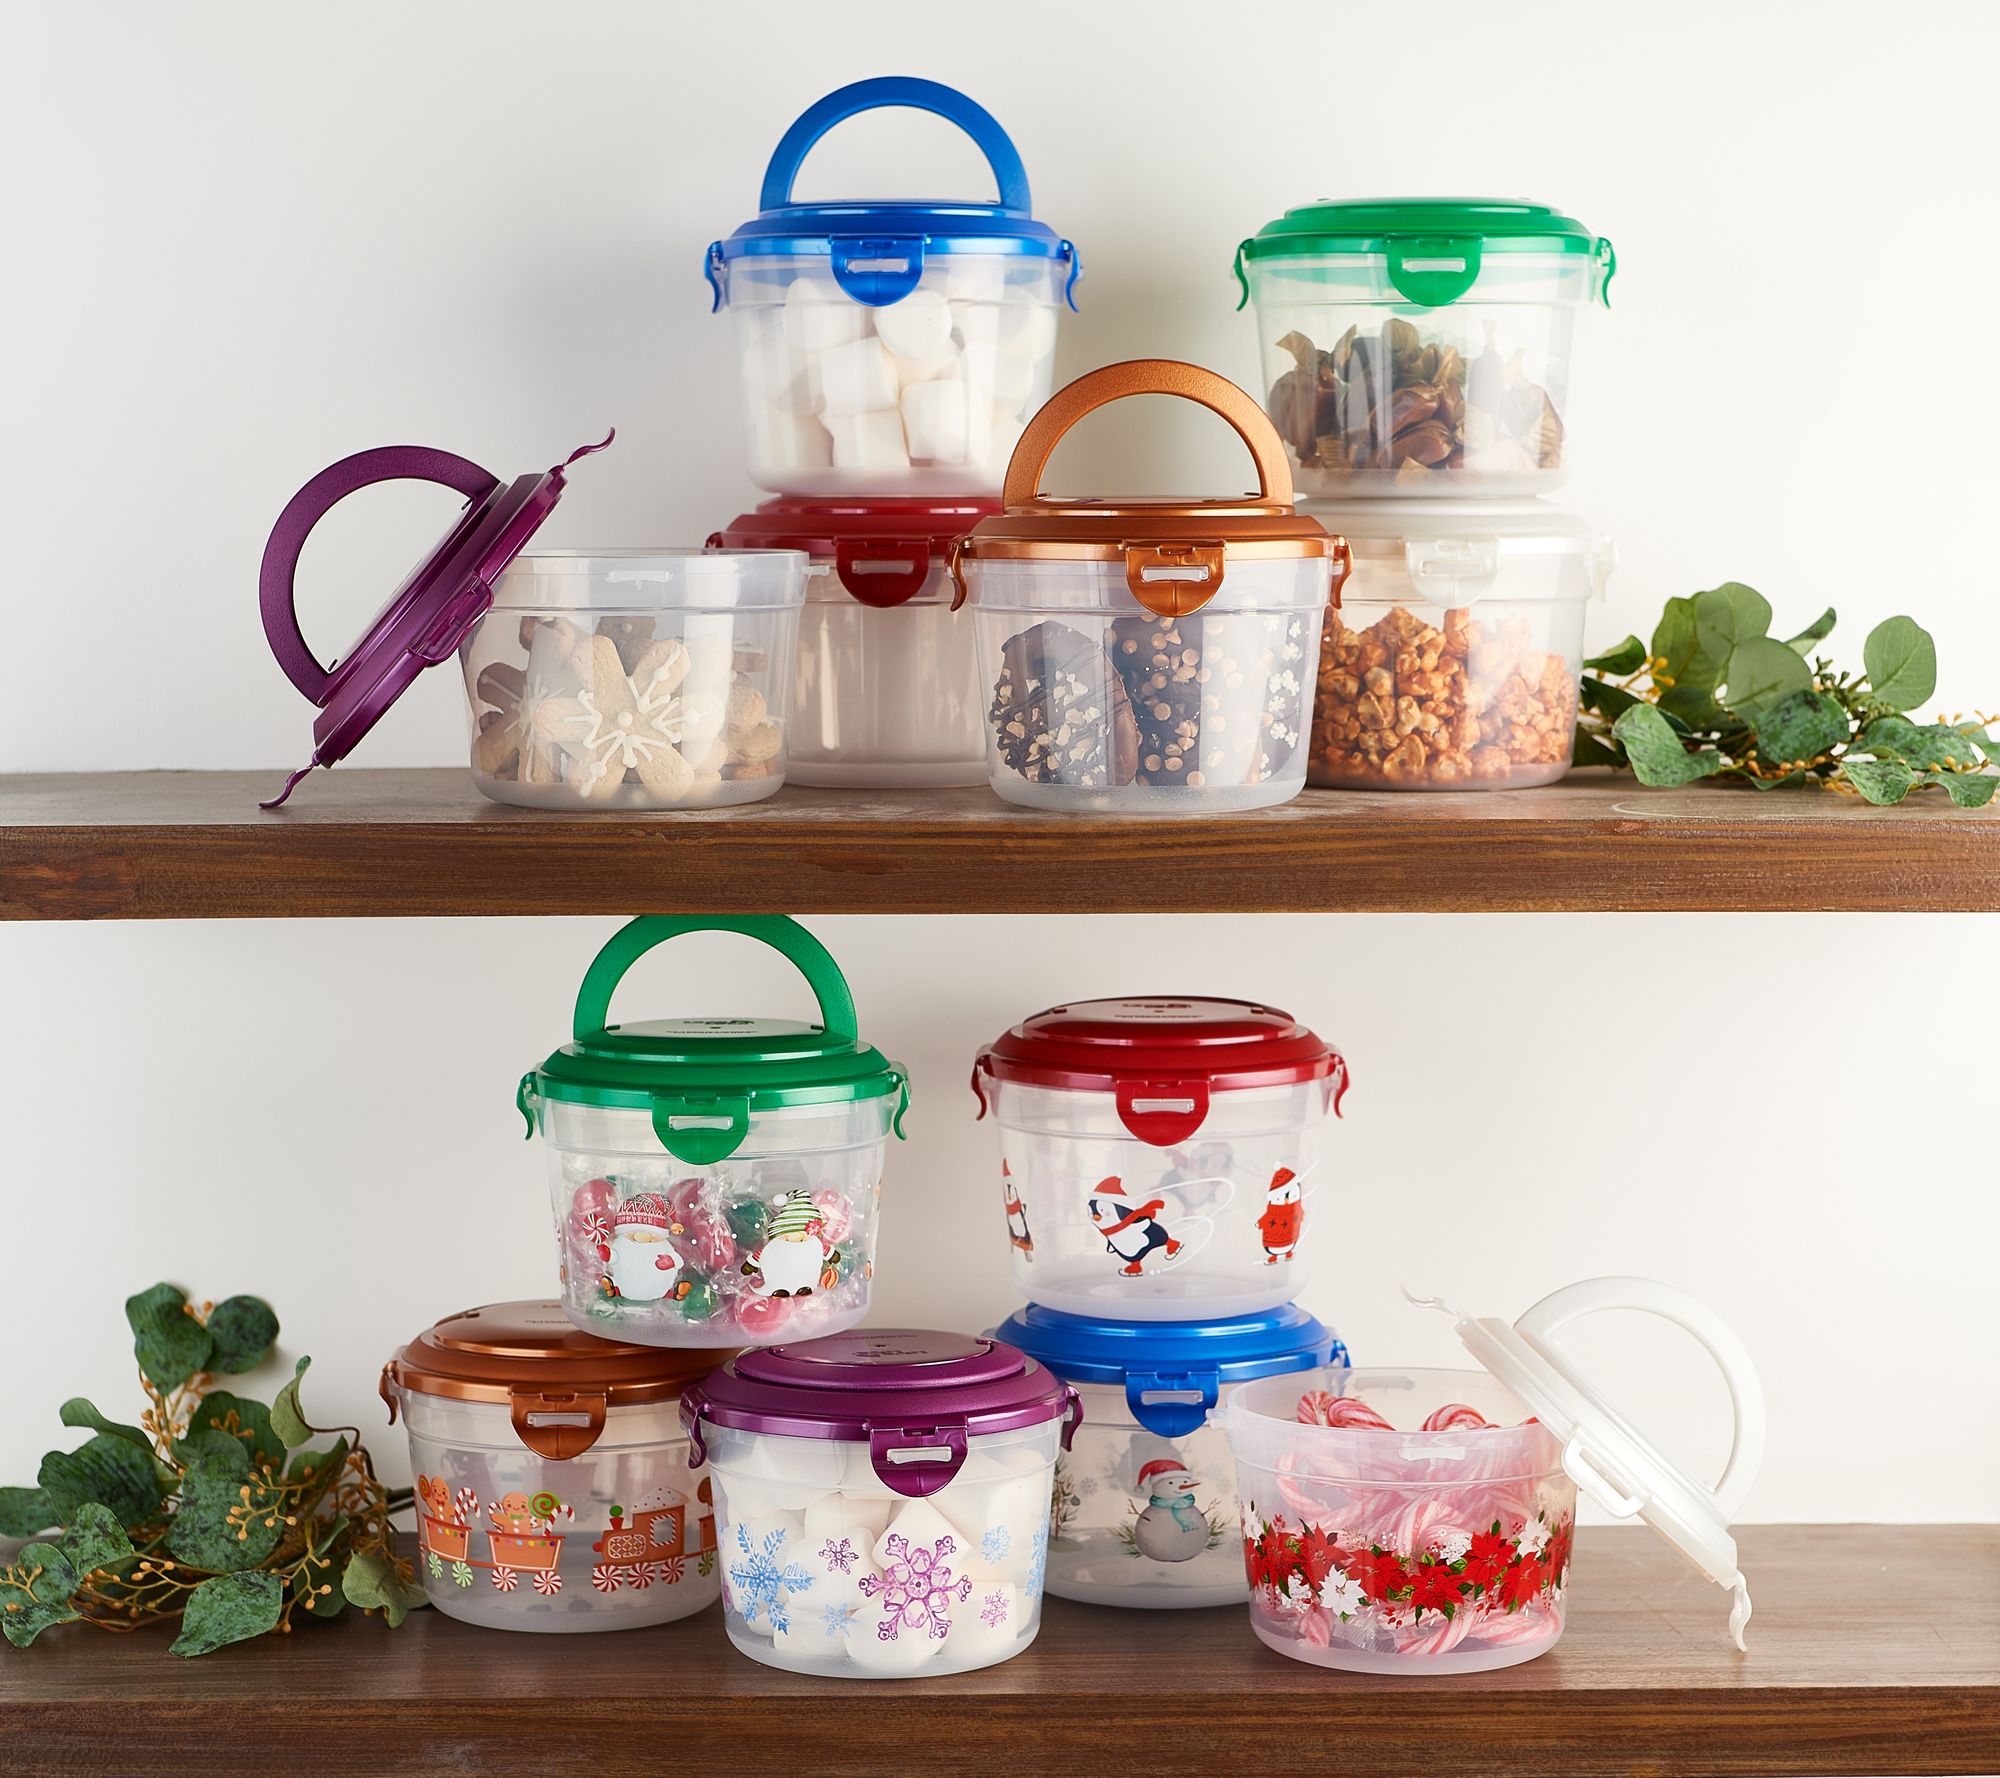 LocknLock XL Multi-Function Storage Container with Handles on QVC